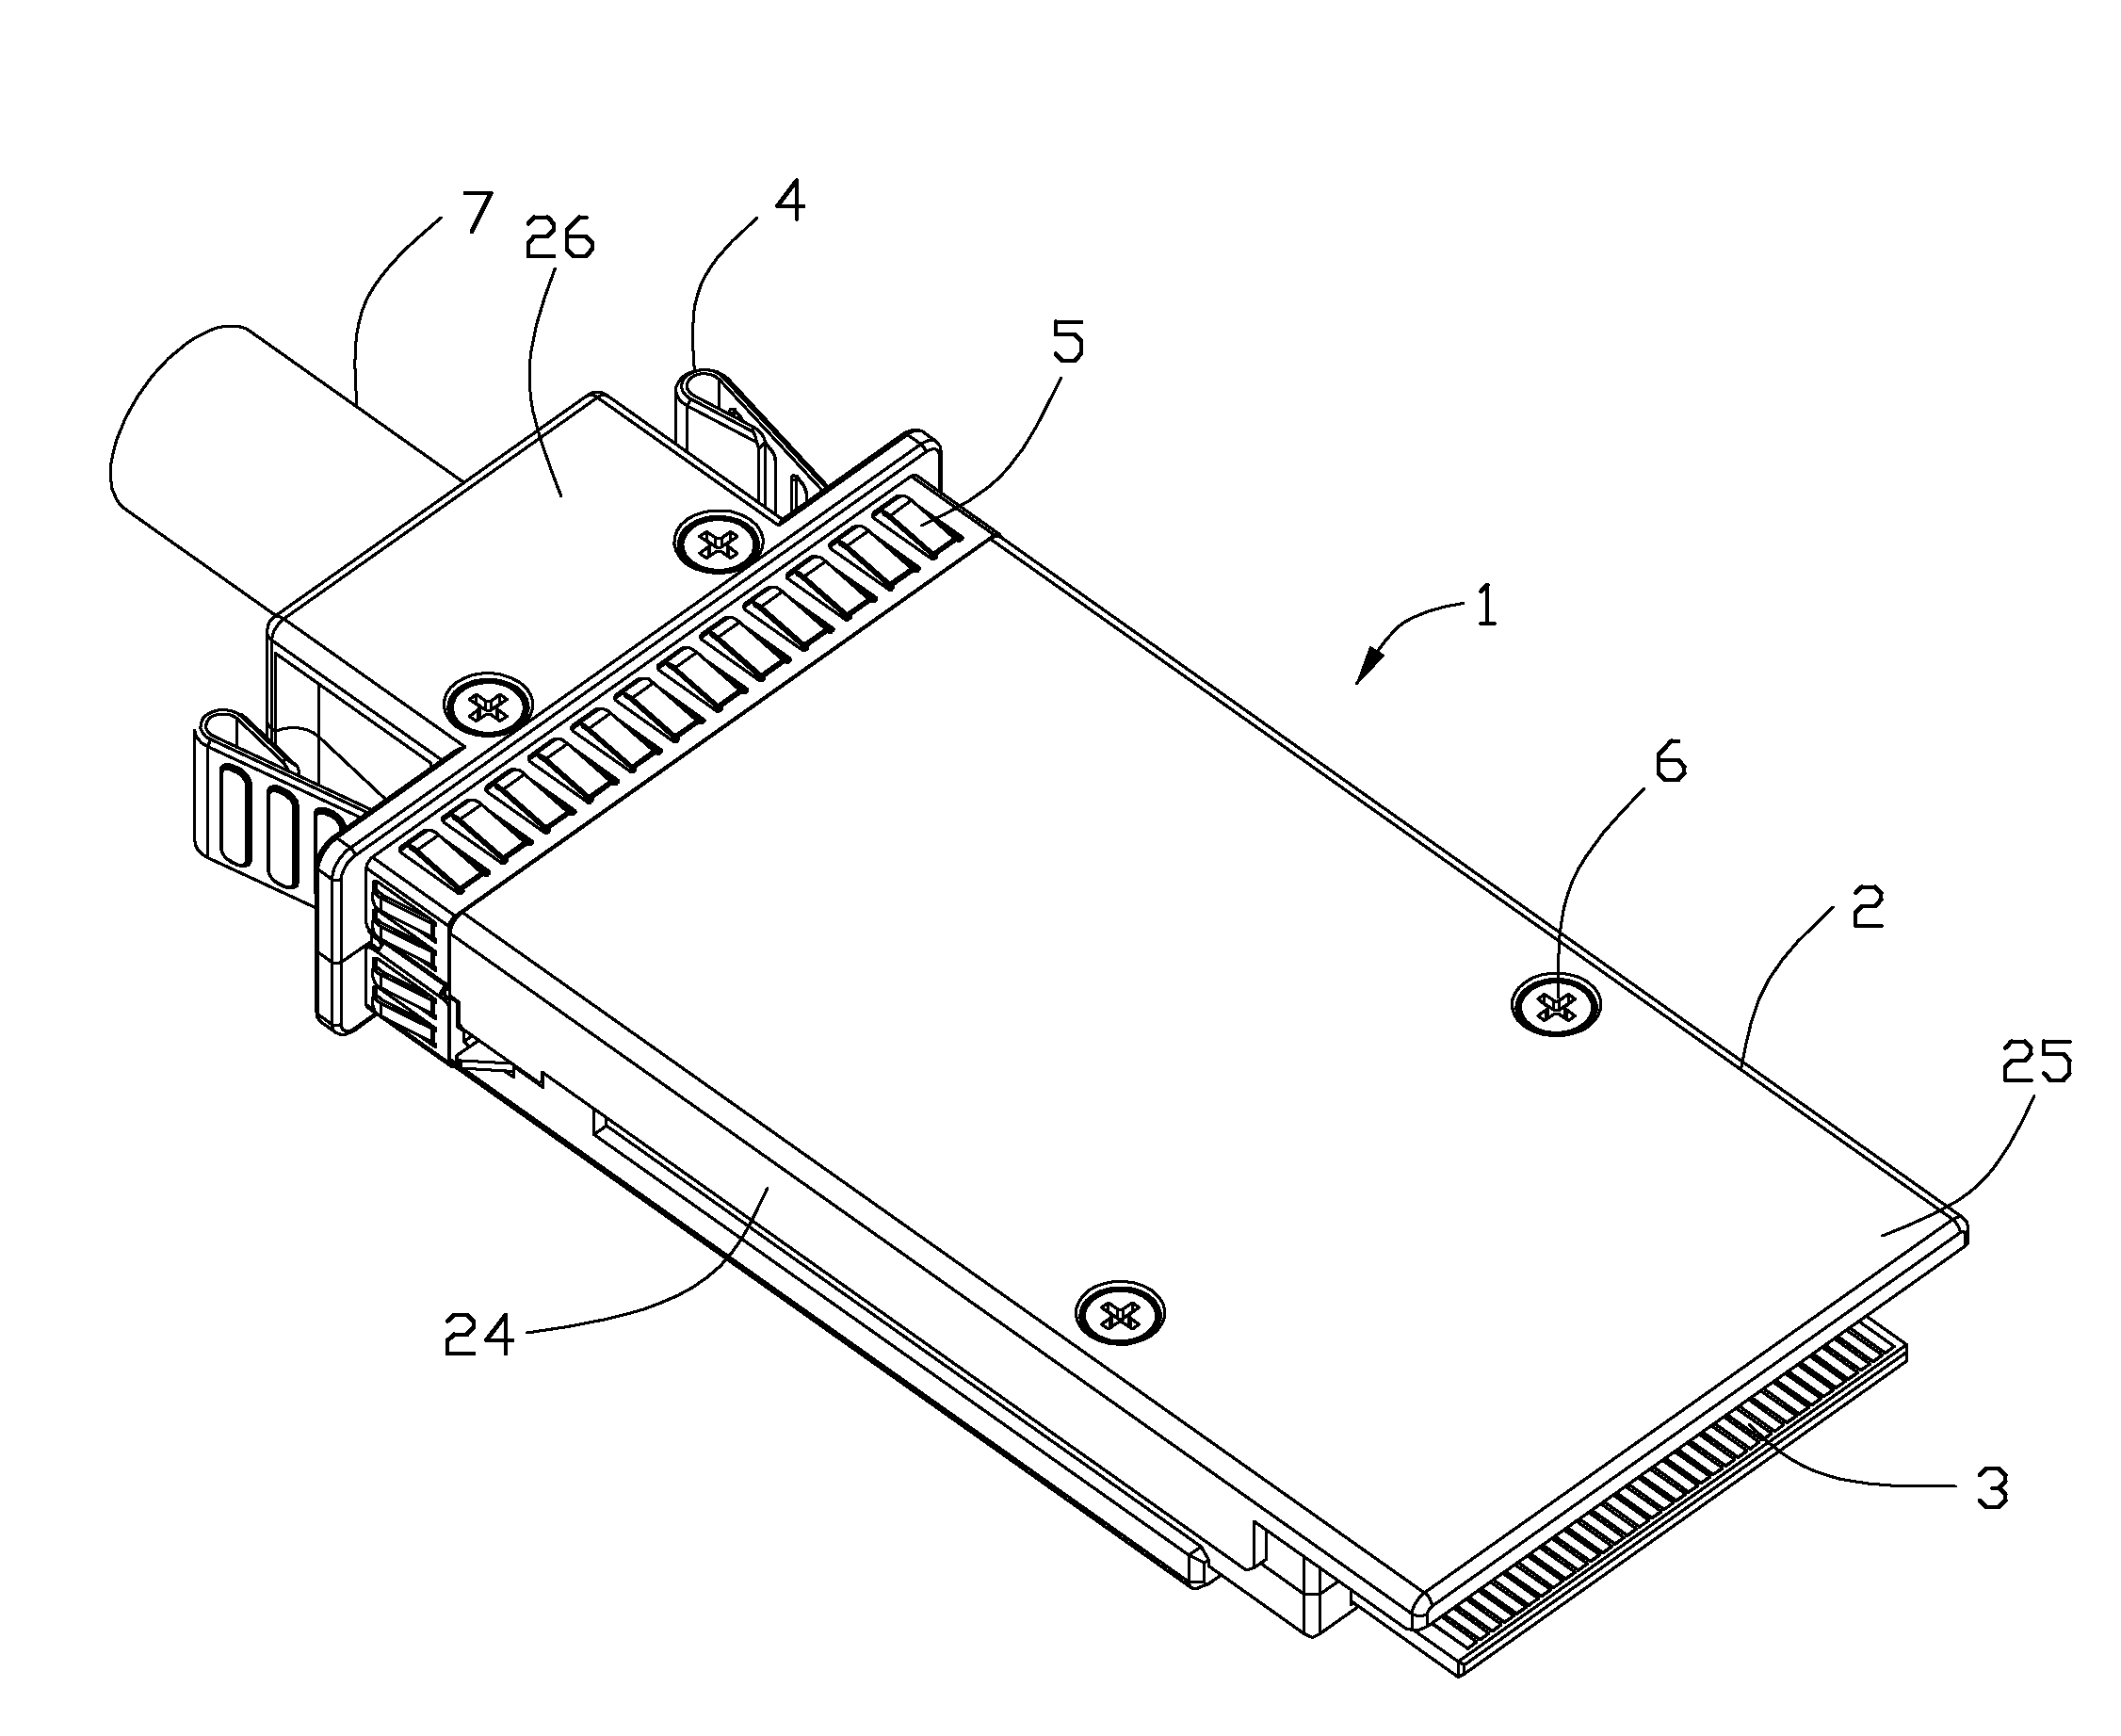 Electrical connector assembly wth improved latching mechanism